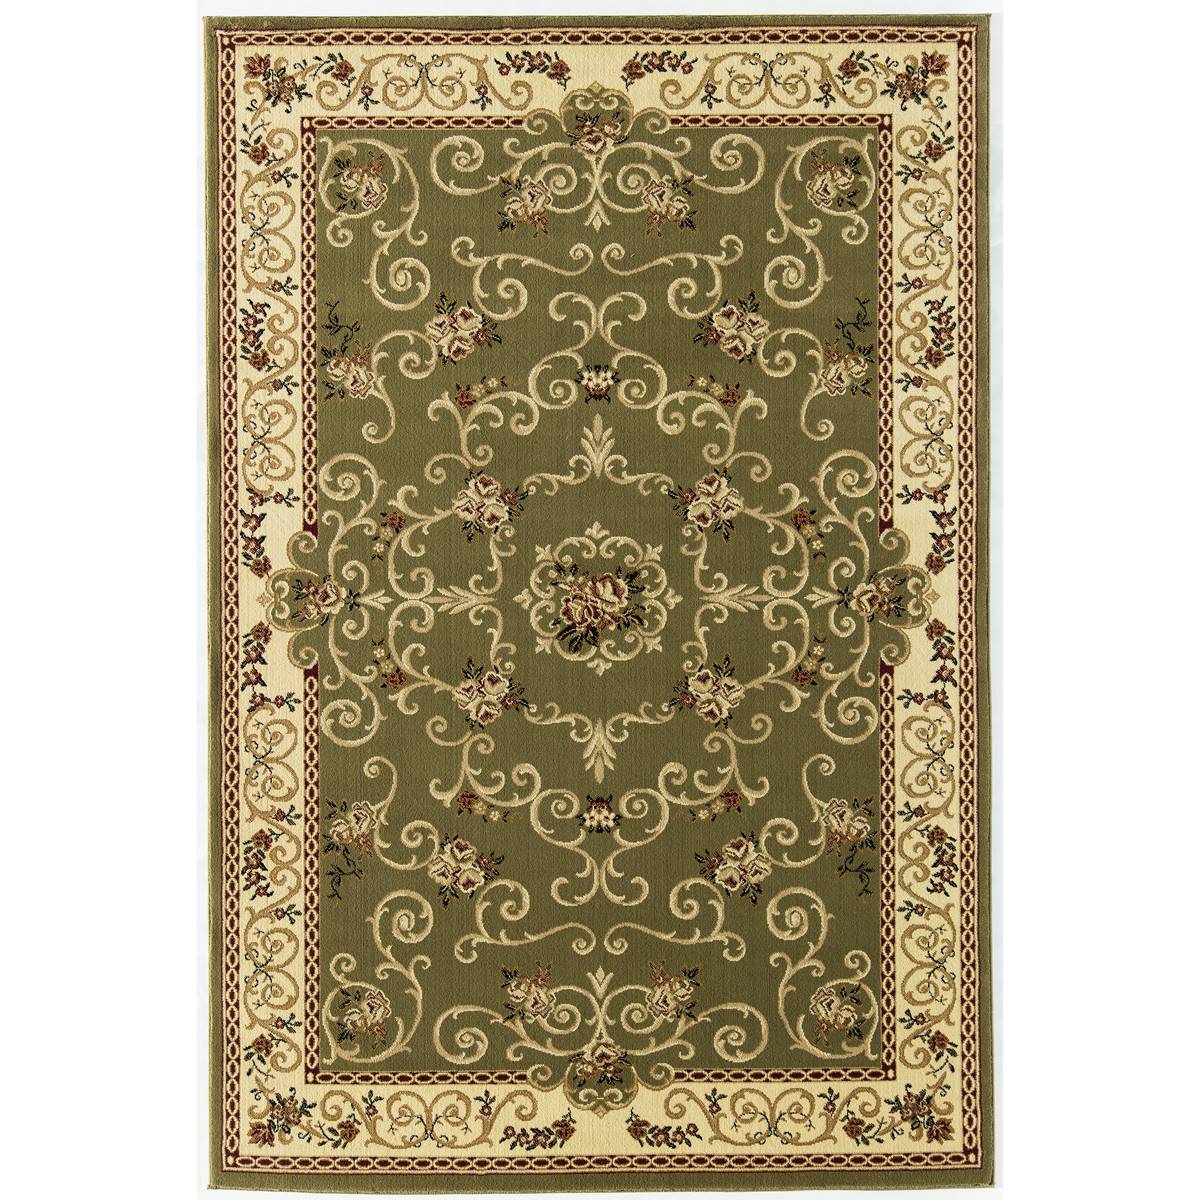 Rugs America(tm) New Vision Souvanerie Rectangle Rug-Olive